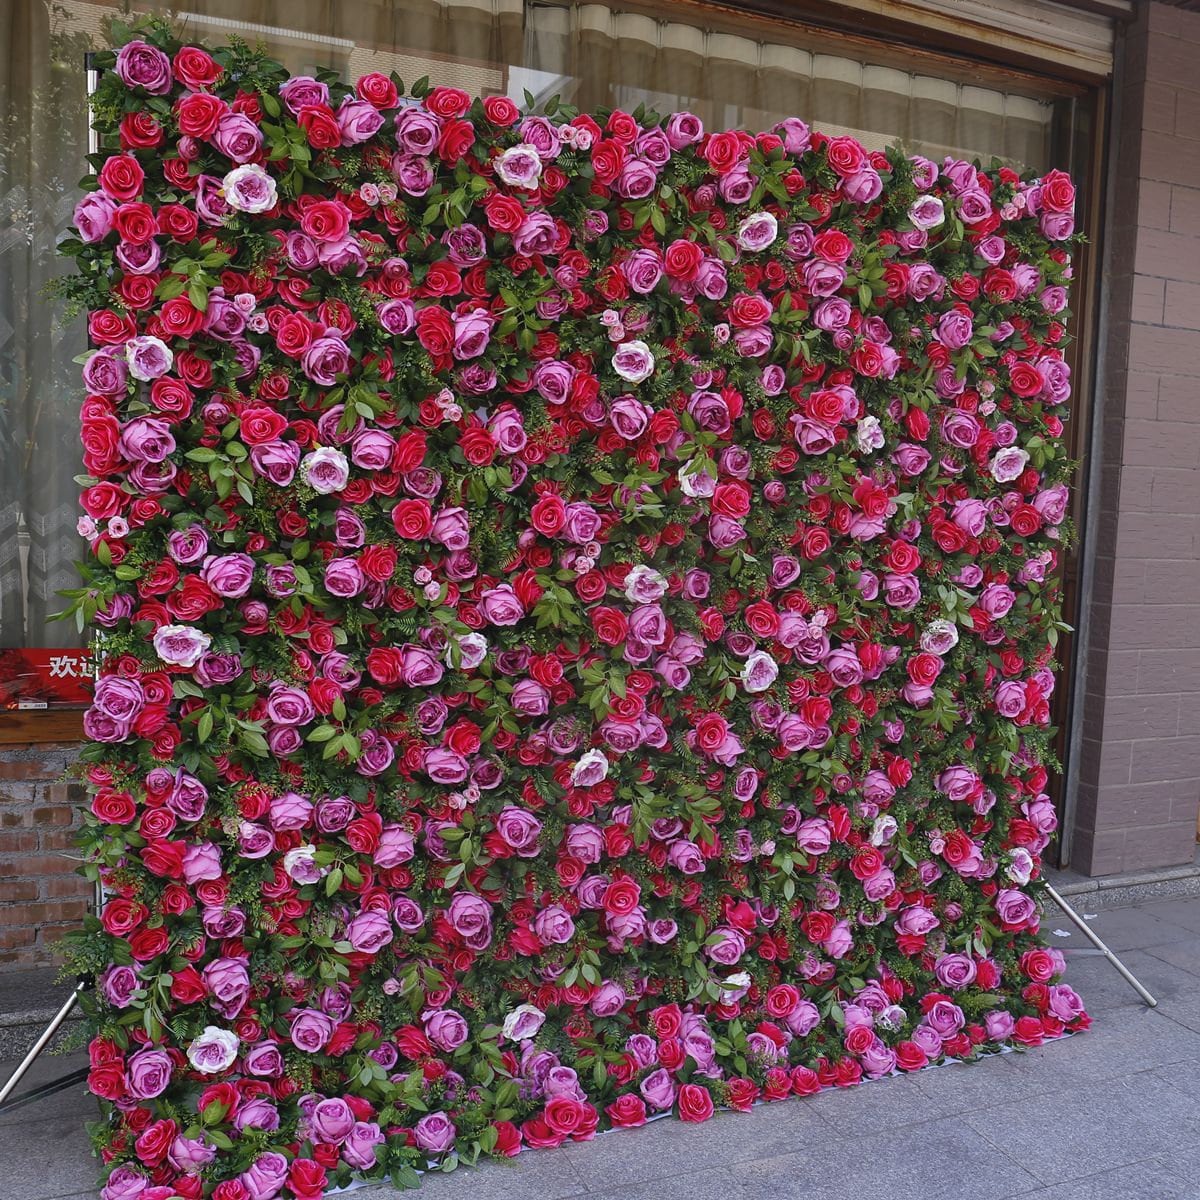 3D Flower Wall For Wedding Arrangement Event Salon Party Photography Backdrop Fabric Rolling Up Curtain Fabric Cloth